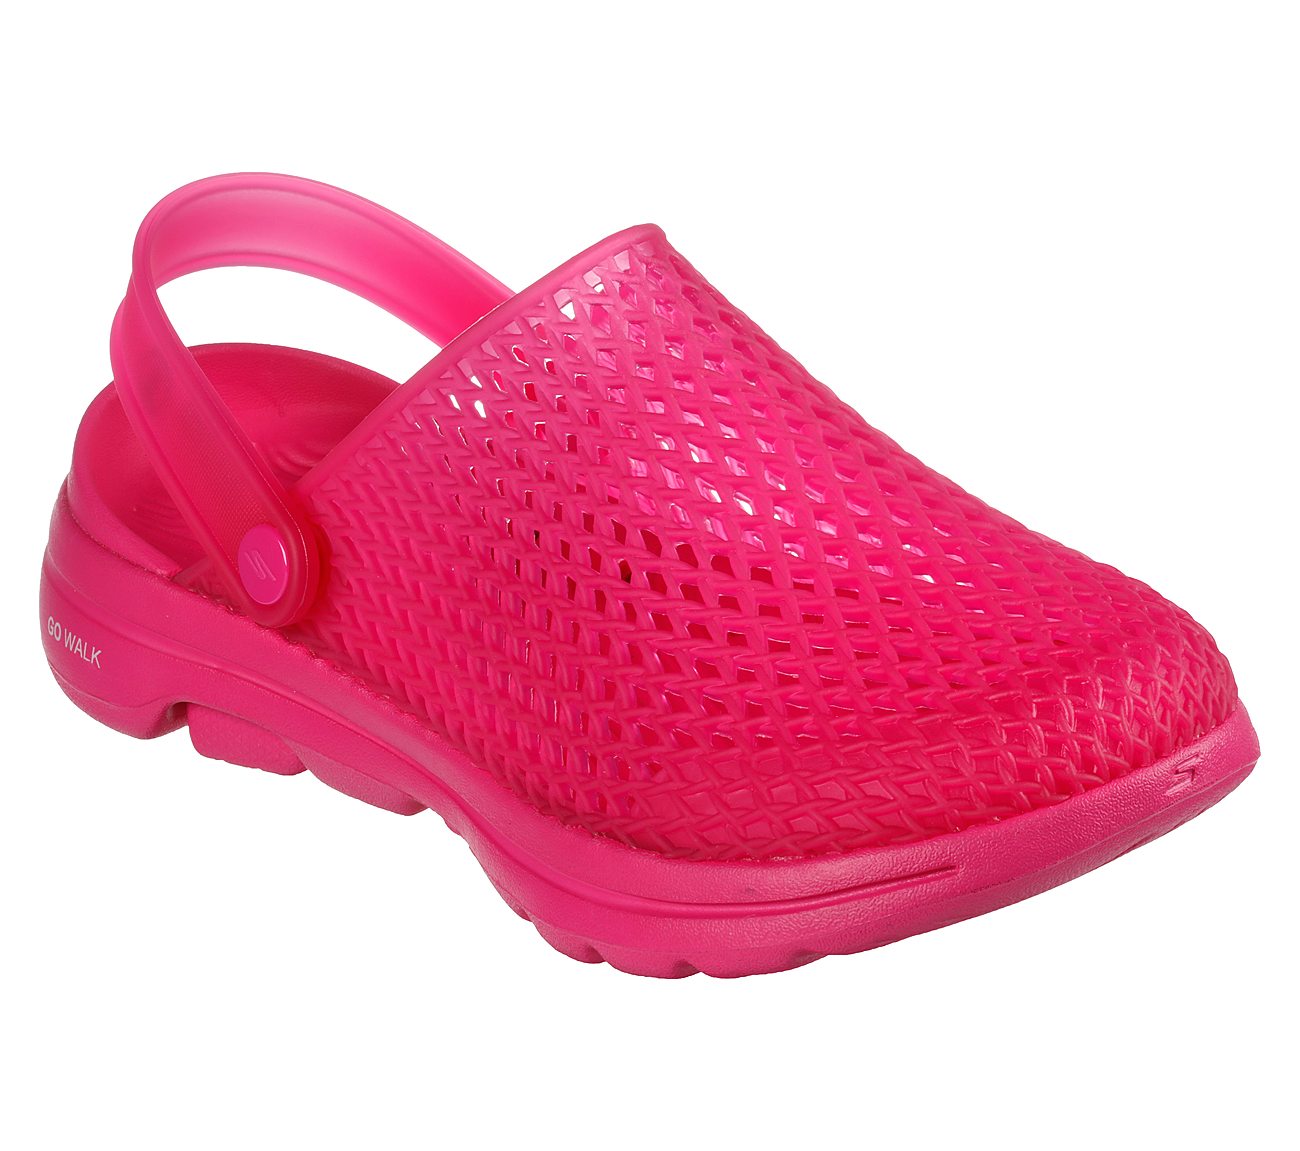 GO WALK 5 - TRUE CATCH, HOT PINK Footwear Lateral View